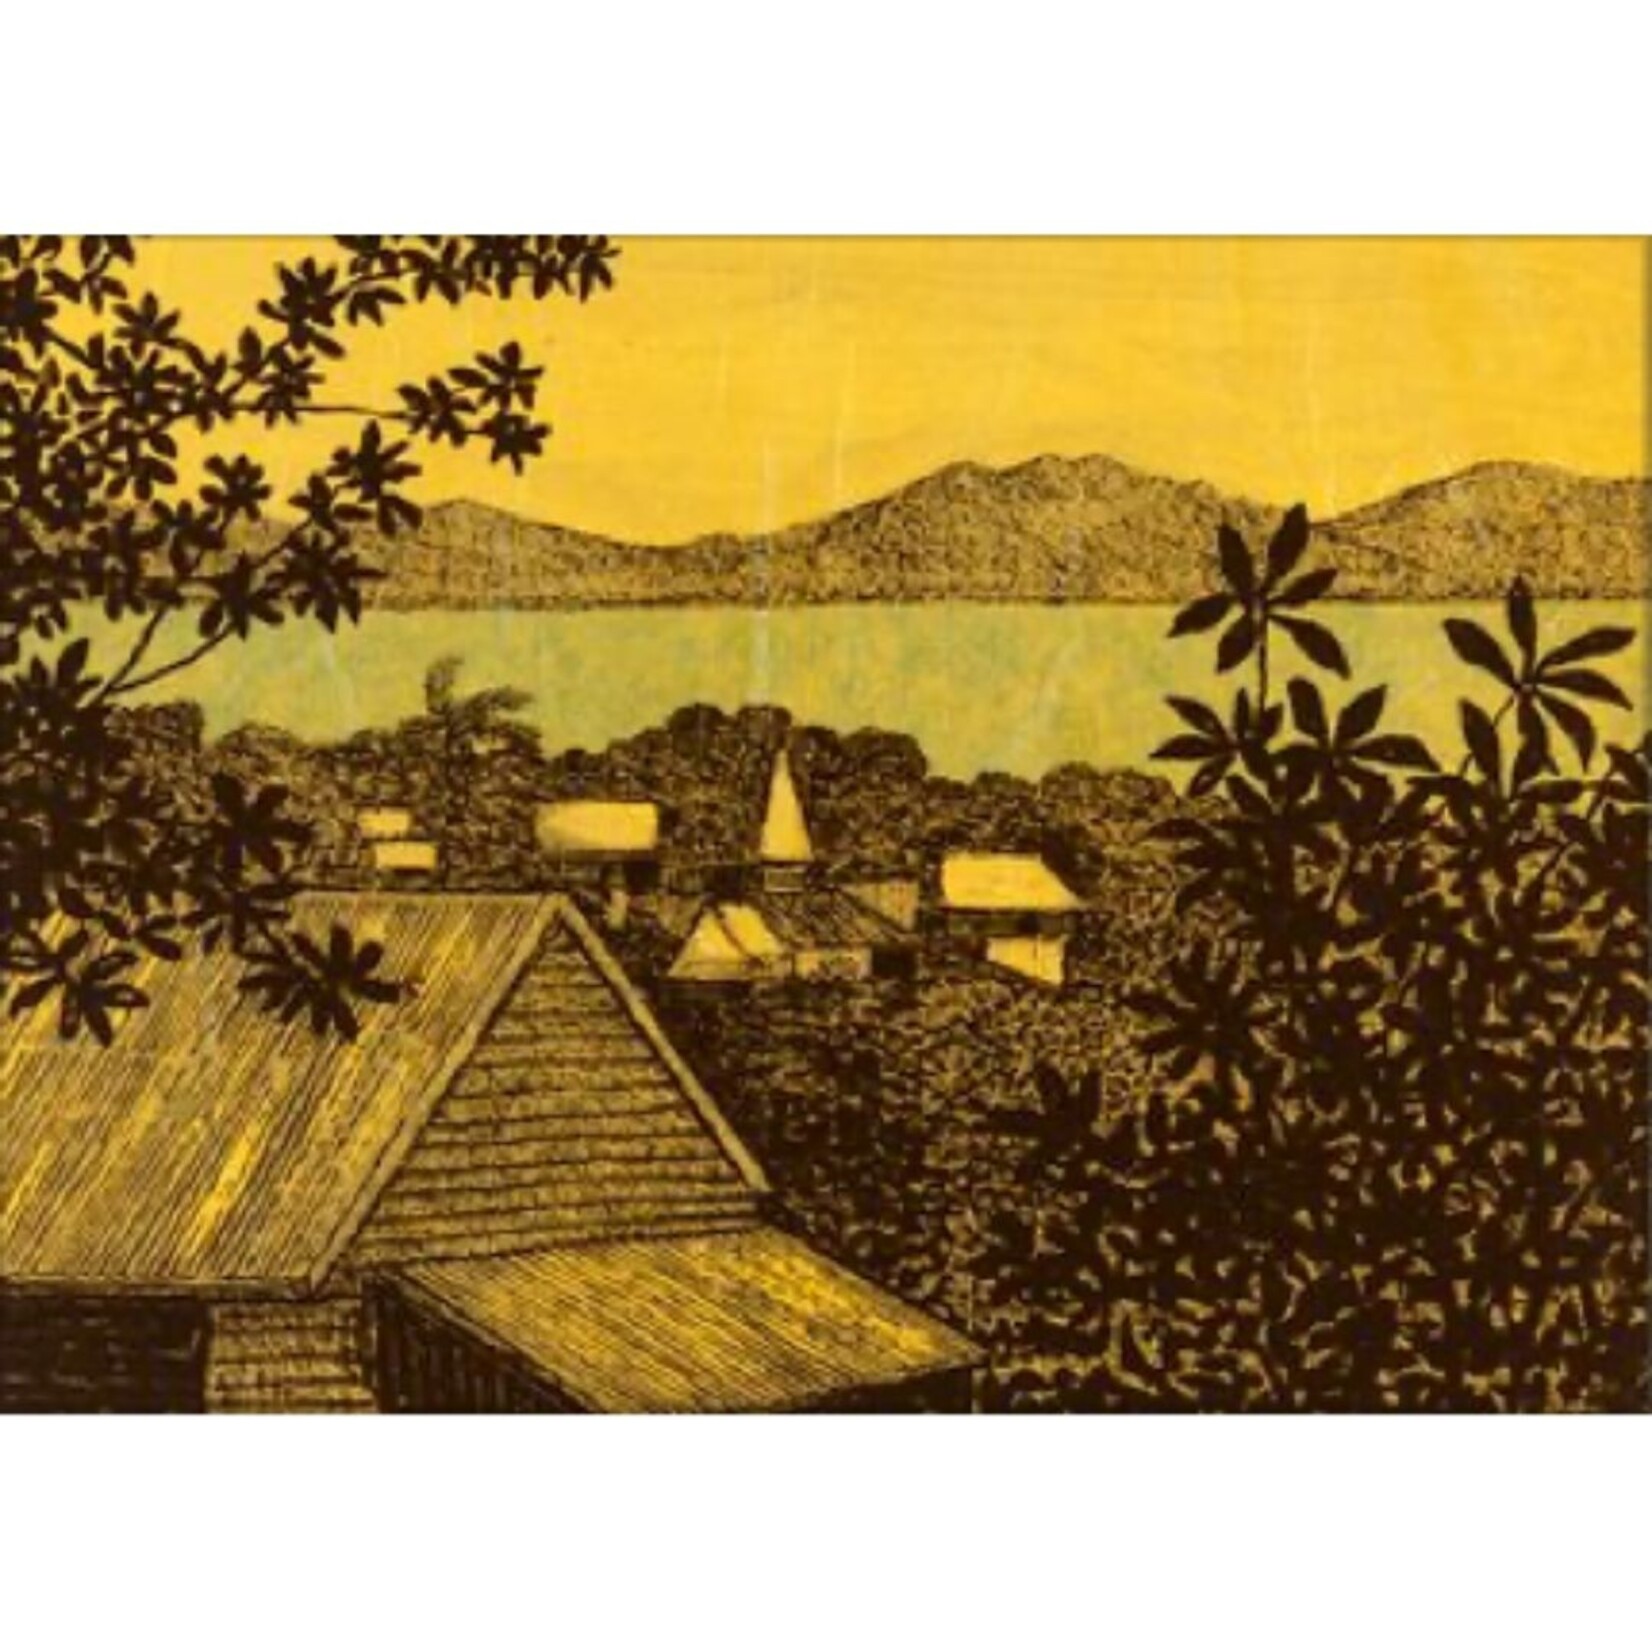 Ray Crooke, The Island | Reproduction Print